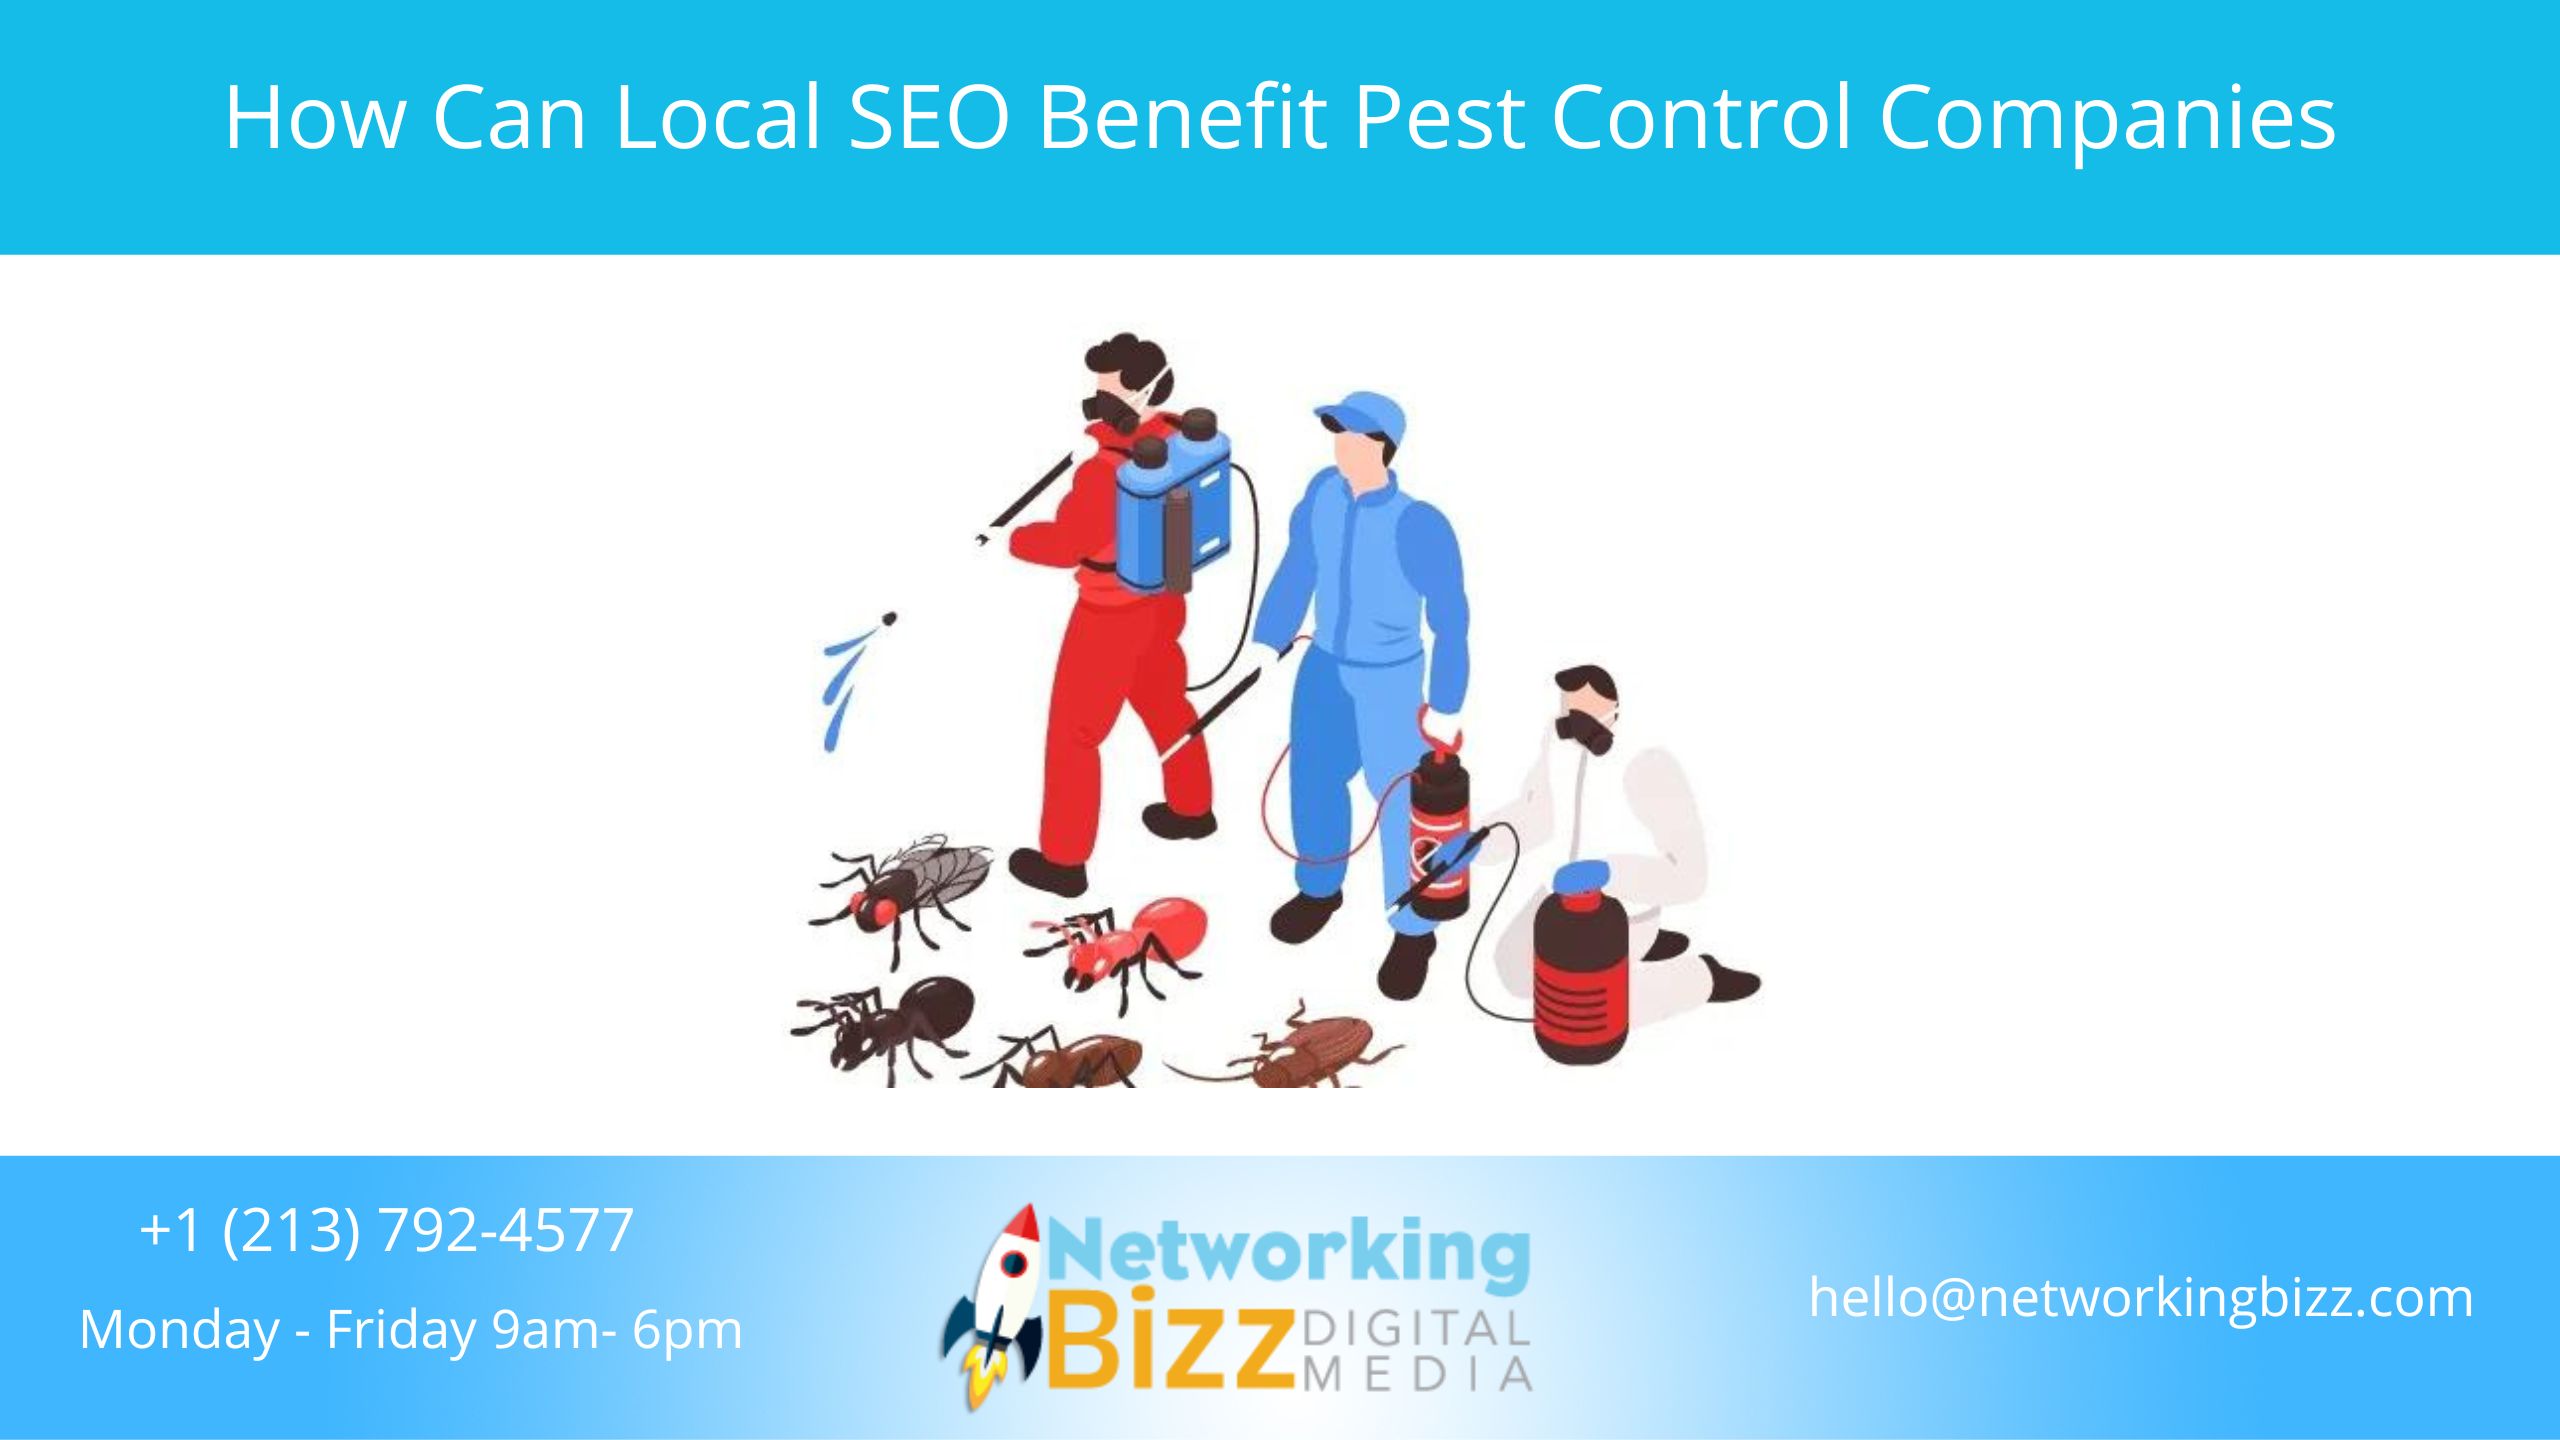 How Can Local SEO Benefit Pest Control Companies